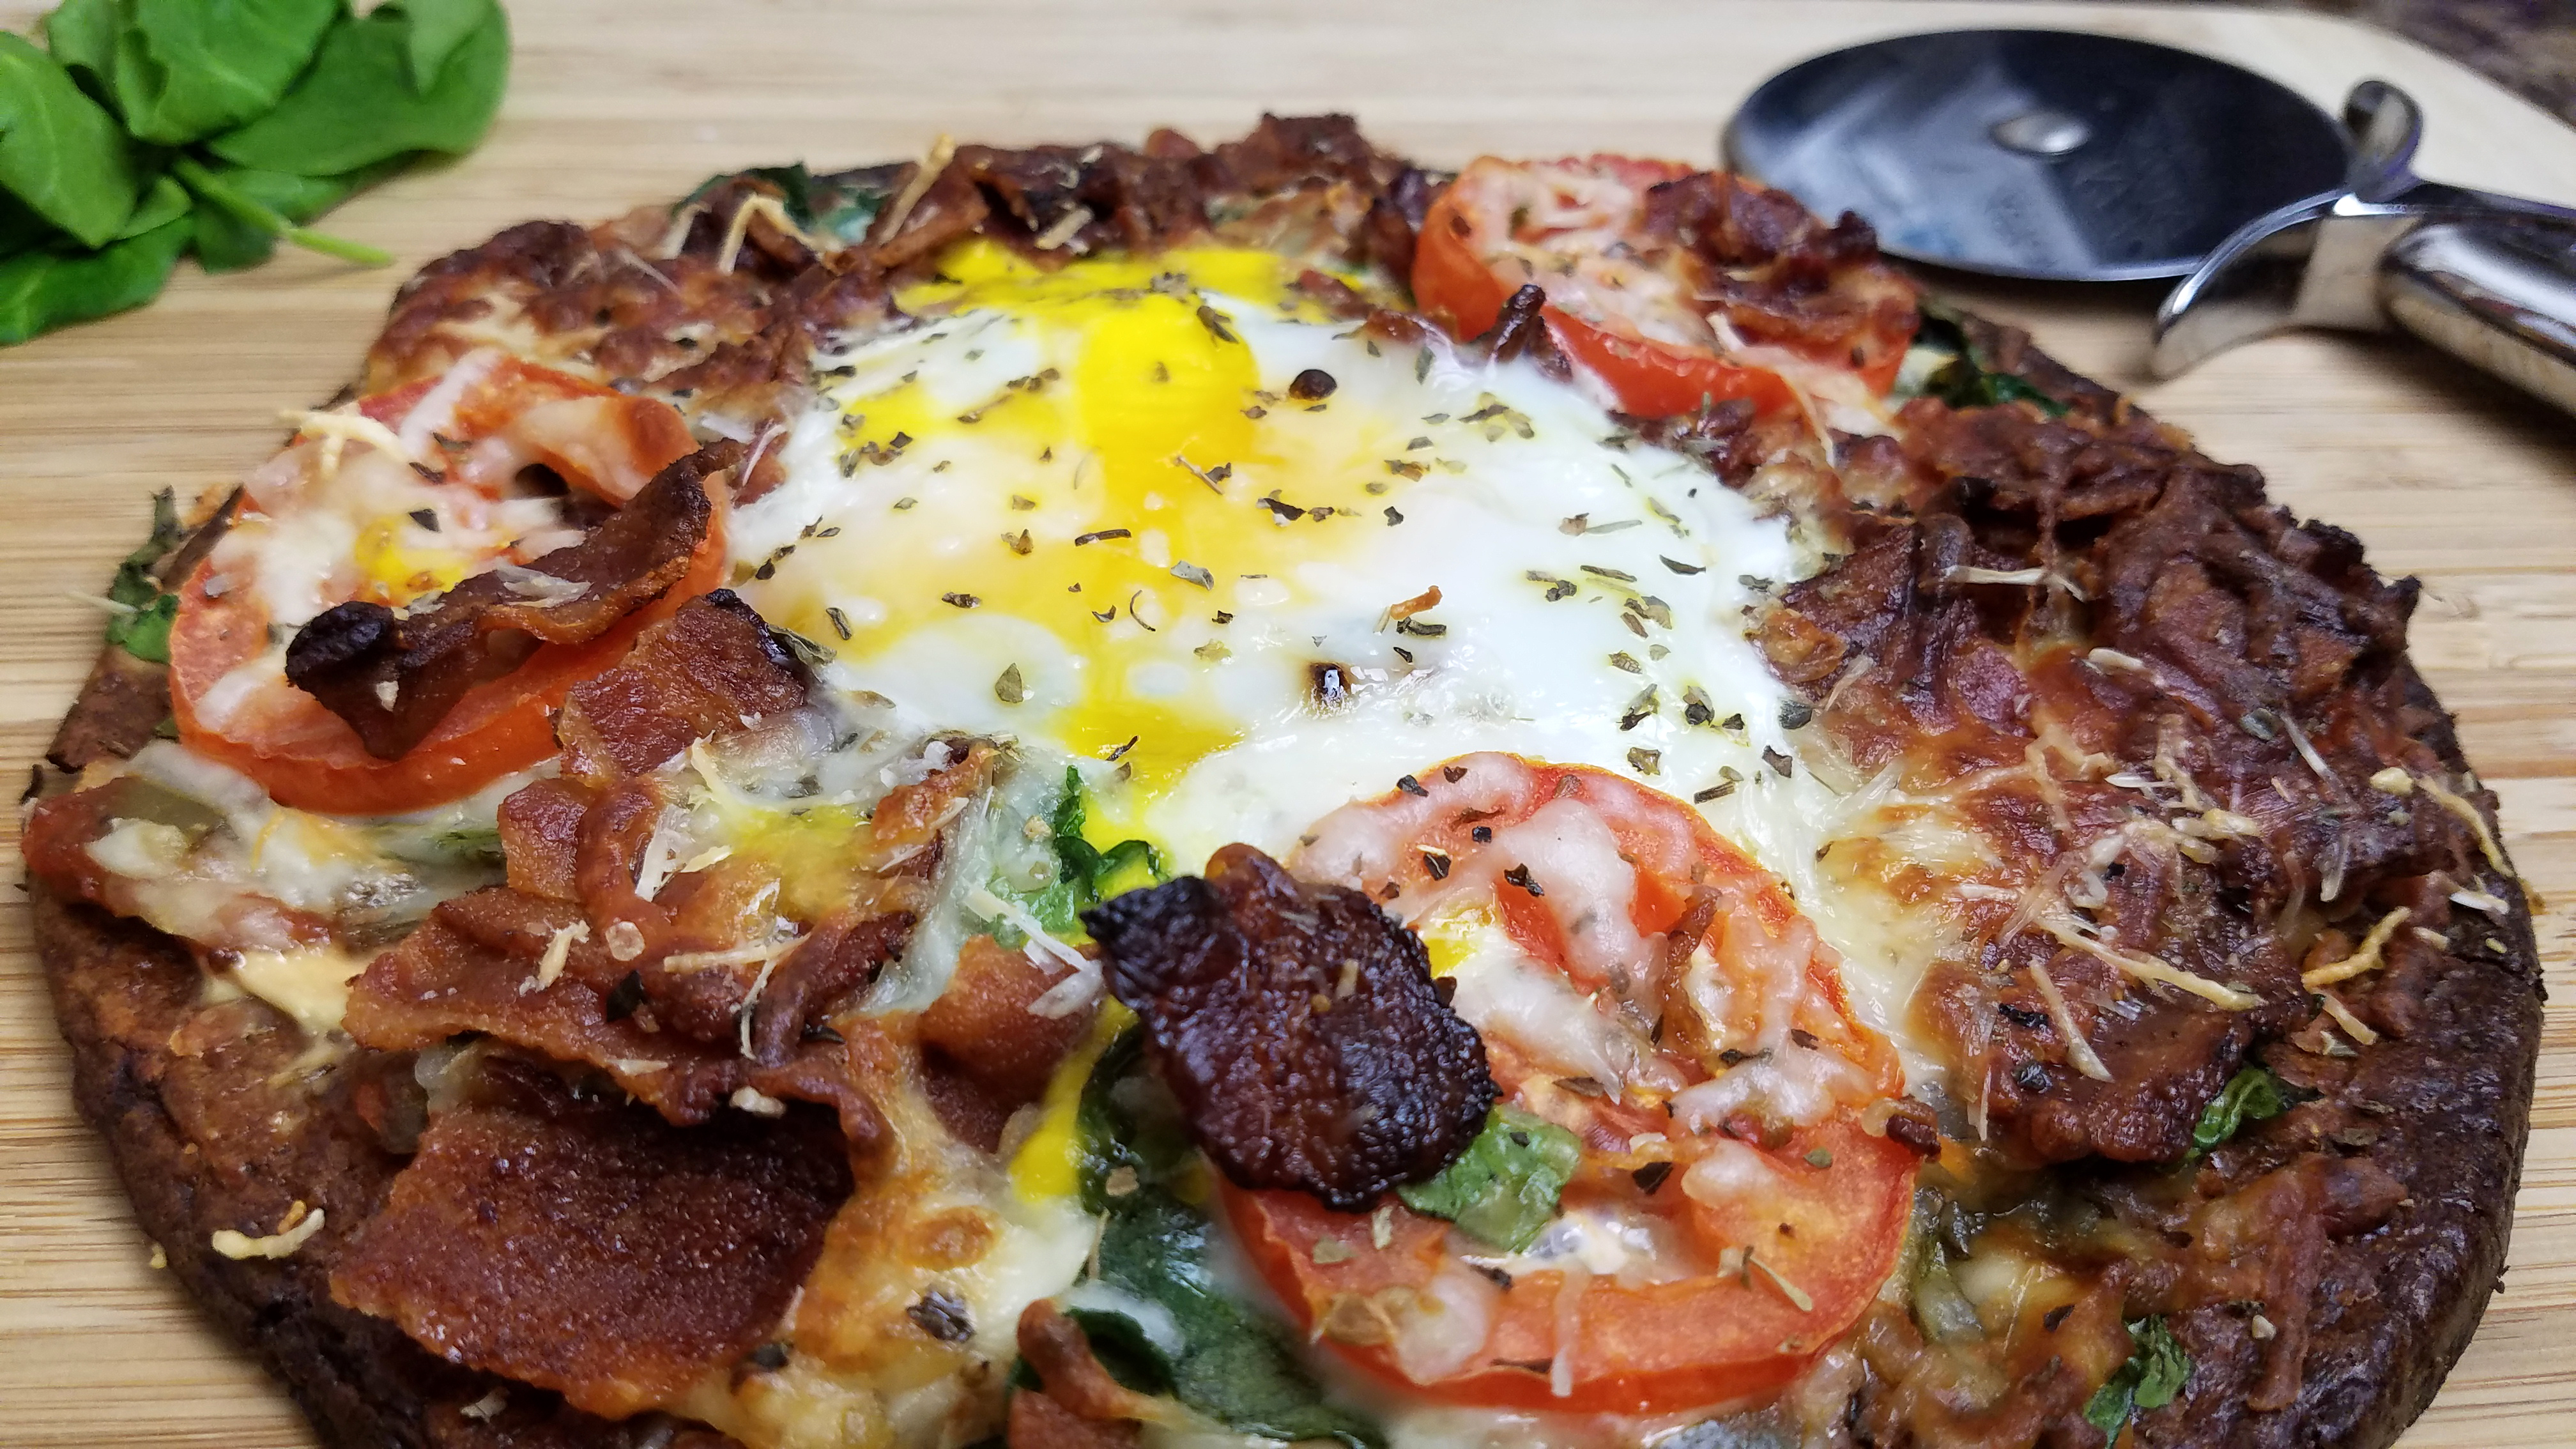 Keto Breakfast Pizza with Low Carb Crust